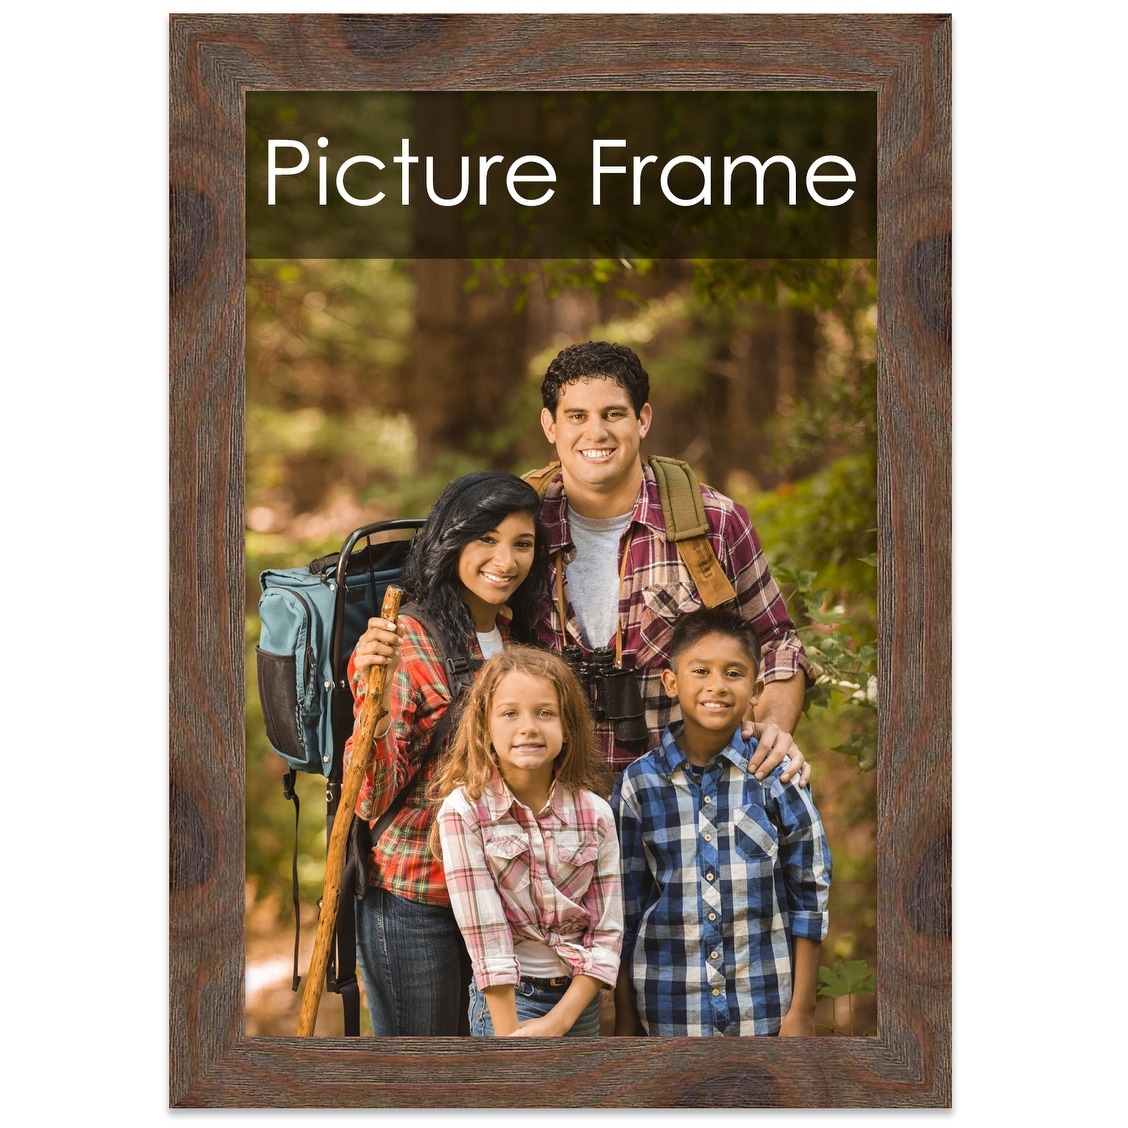 Eco-friendly 16x20 Black, White, Walnut Poster Frames, 20x16 Picture Frames  for Photos, Wall Art, Prints, Puzzles, Living Room, Bedroom 